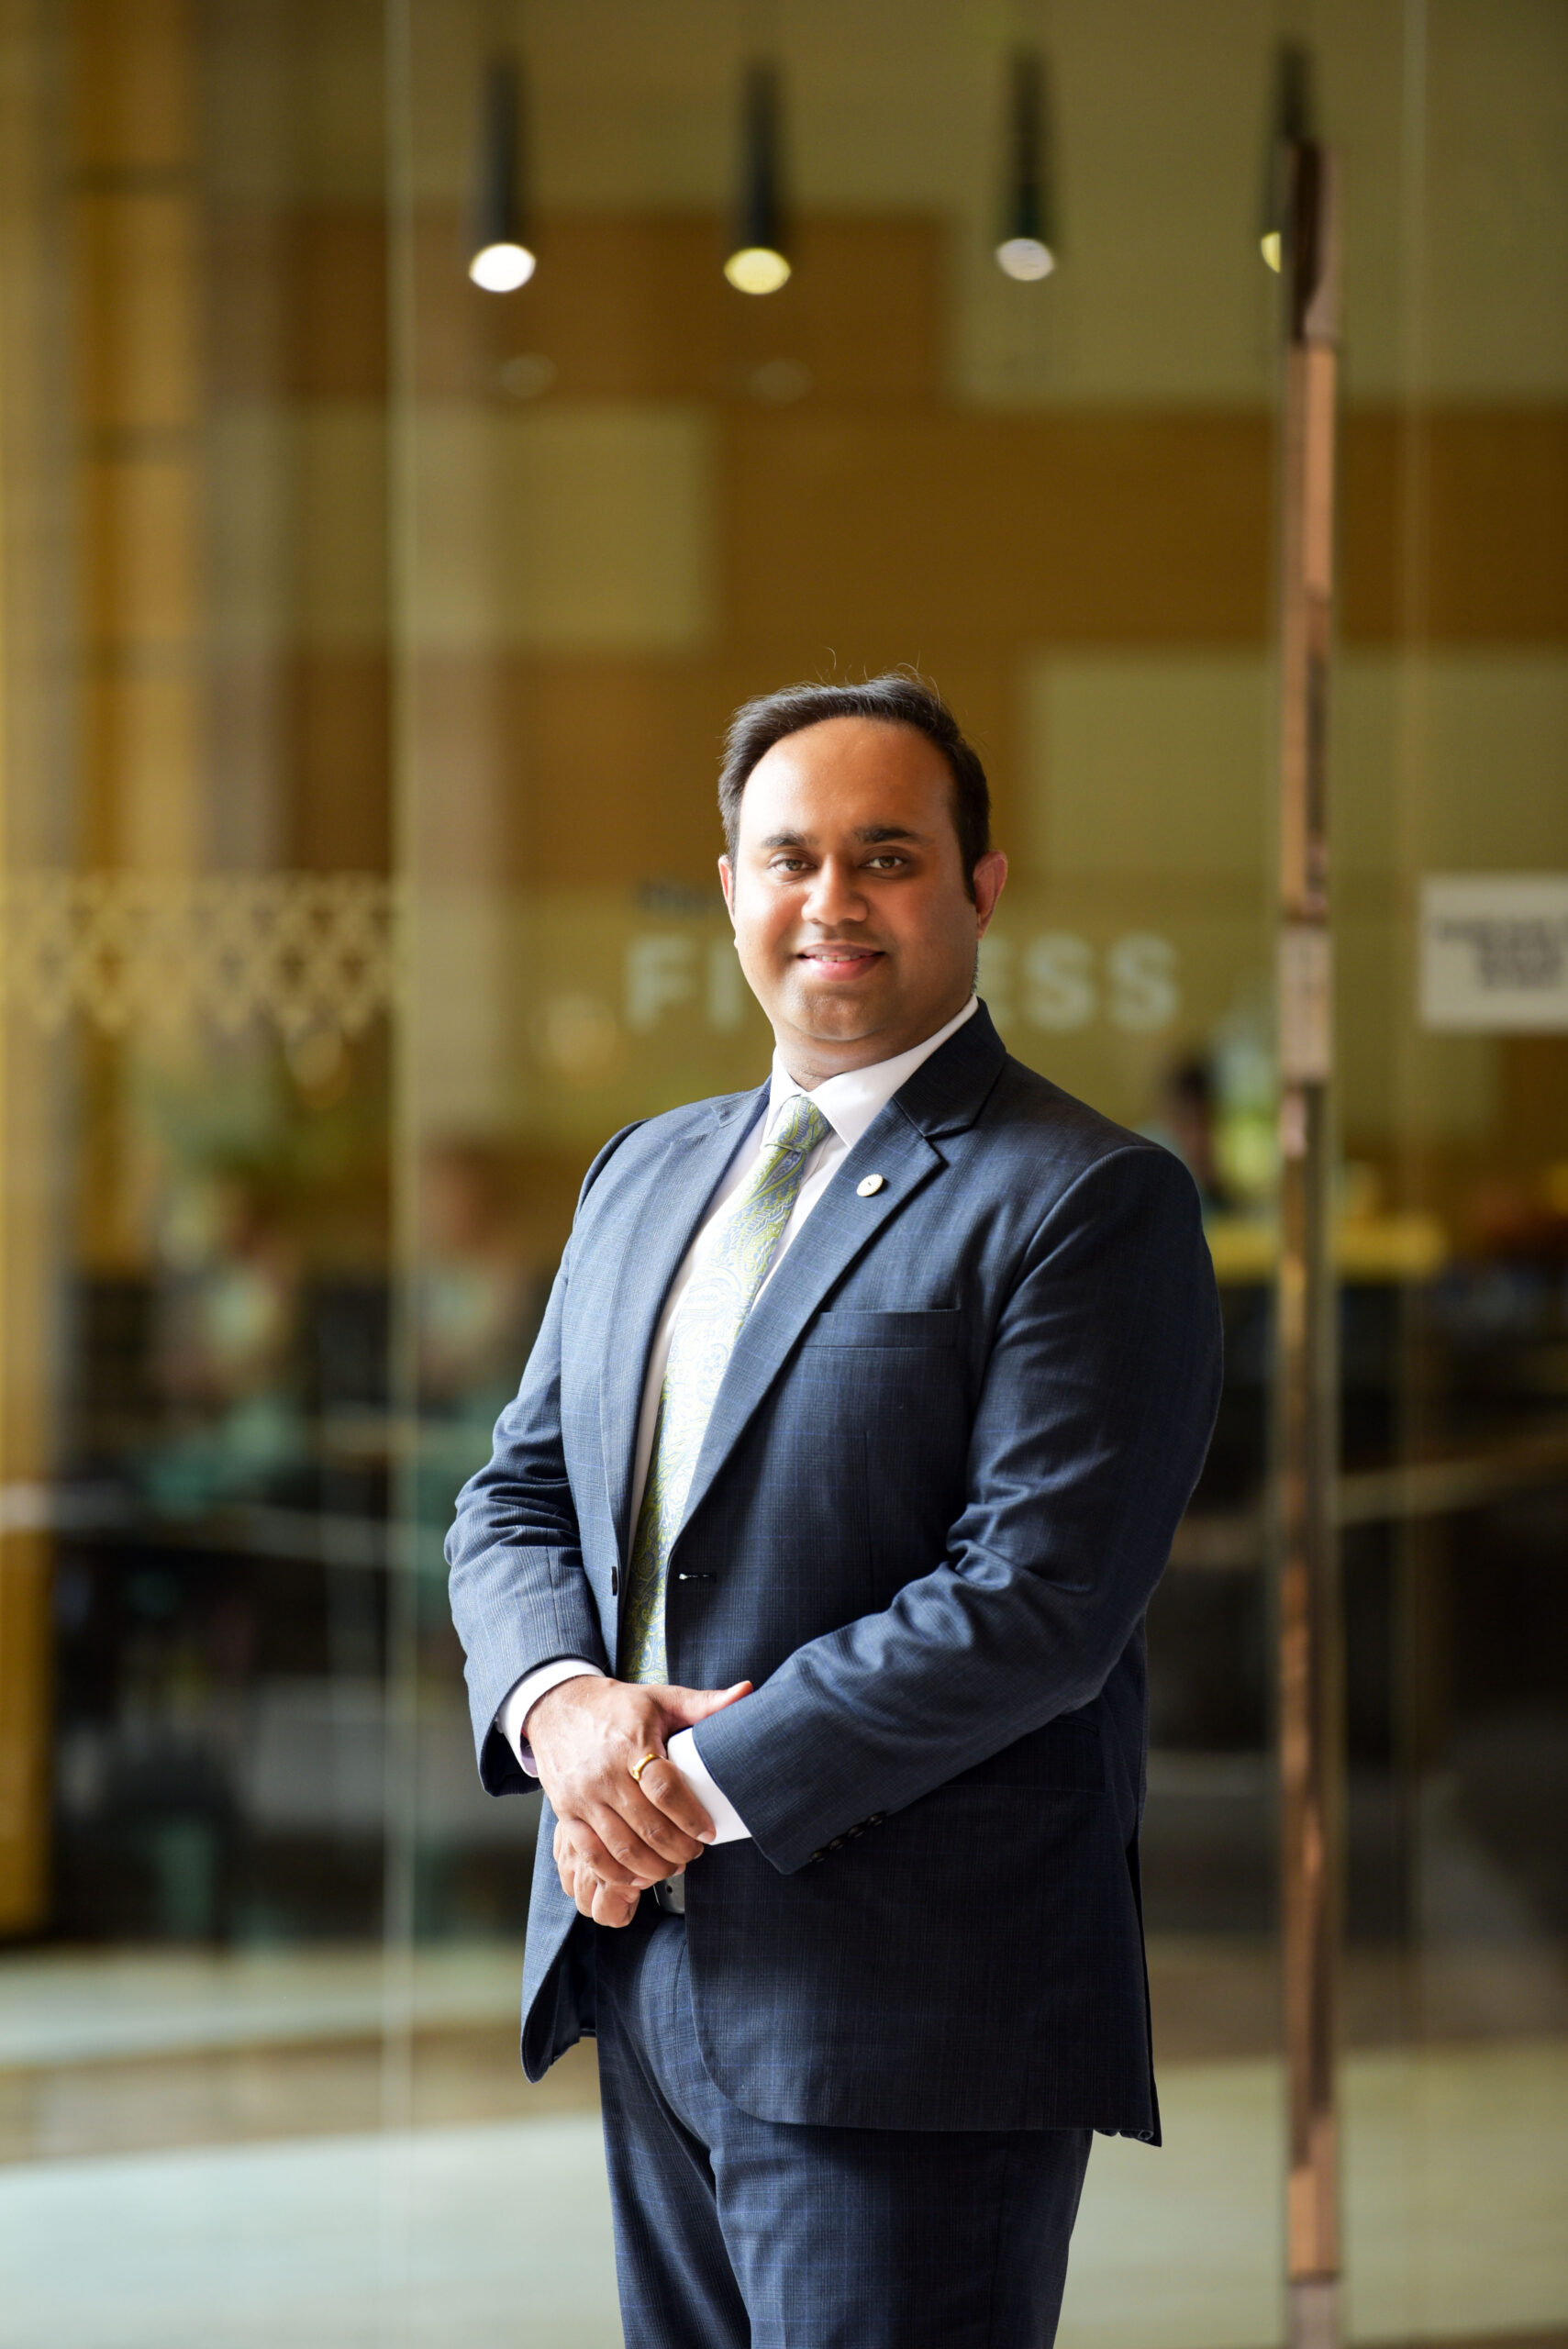 Sheraton Grand Bengaluru Whitefield Hotel & Convention Center appoints Gaurav D Desai as its Director of Sales